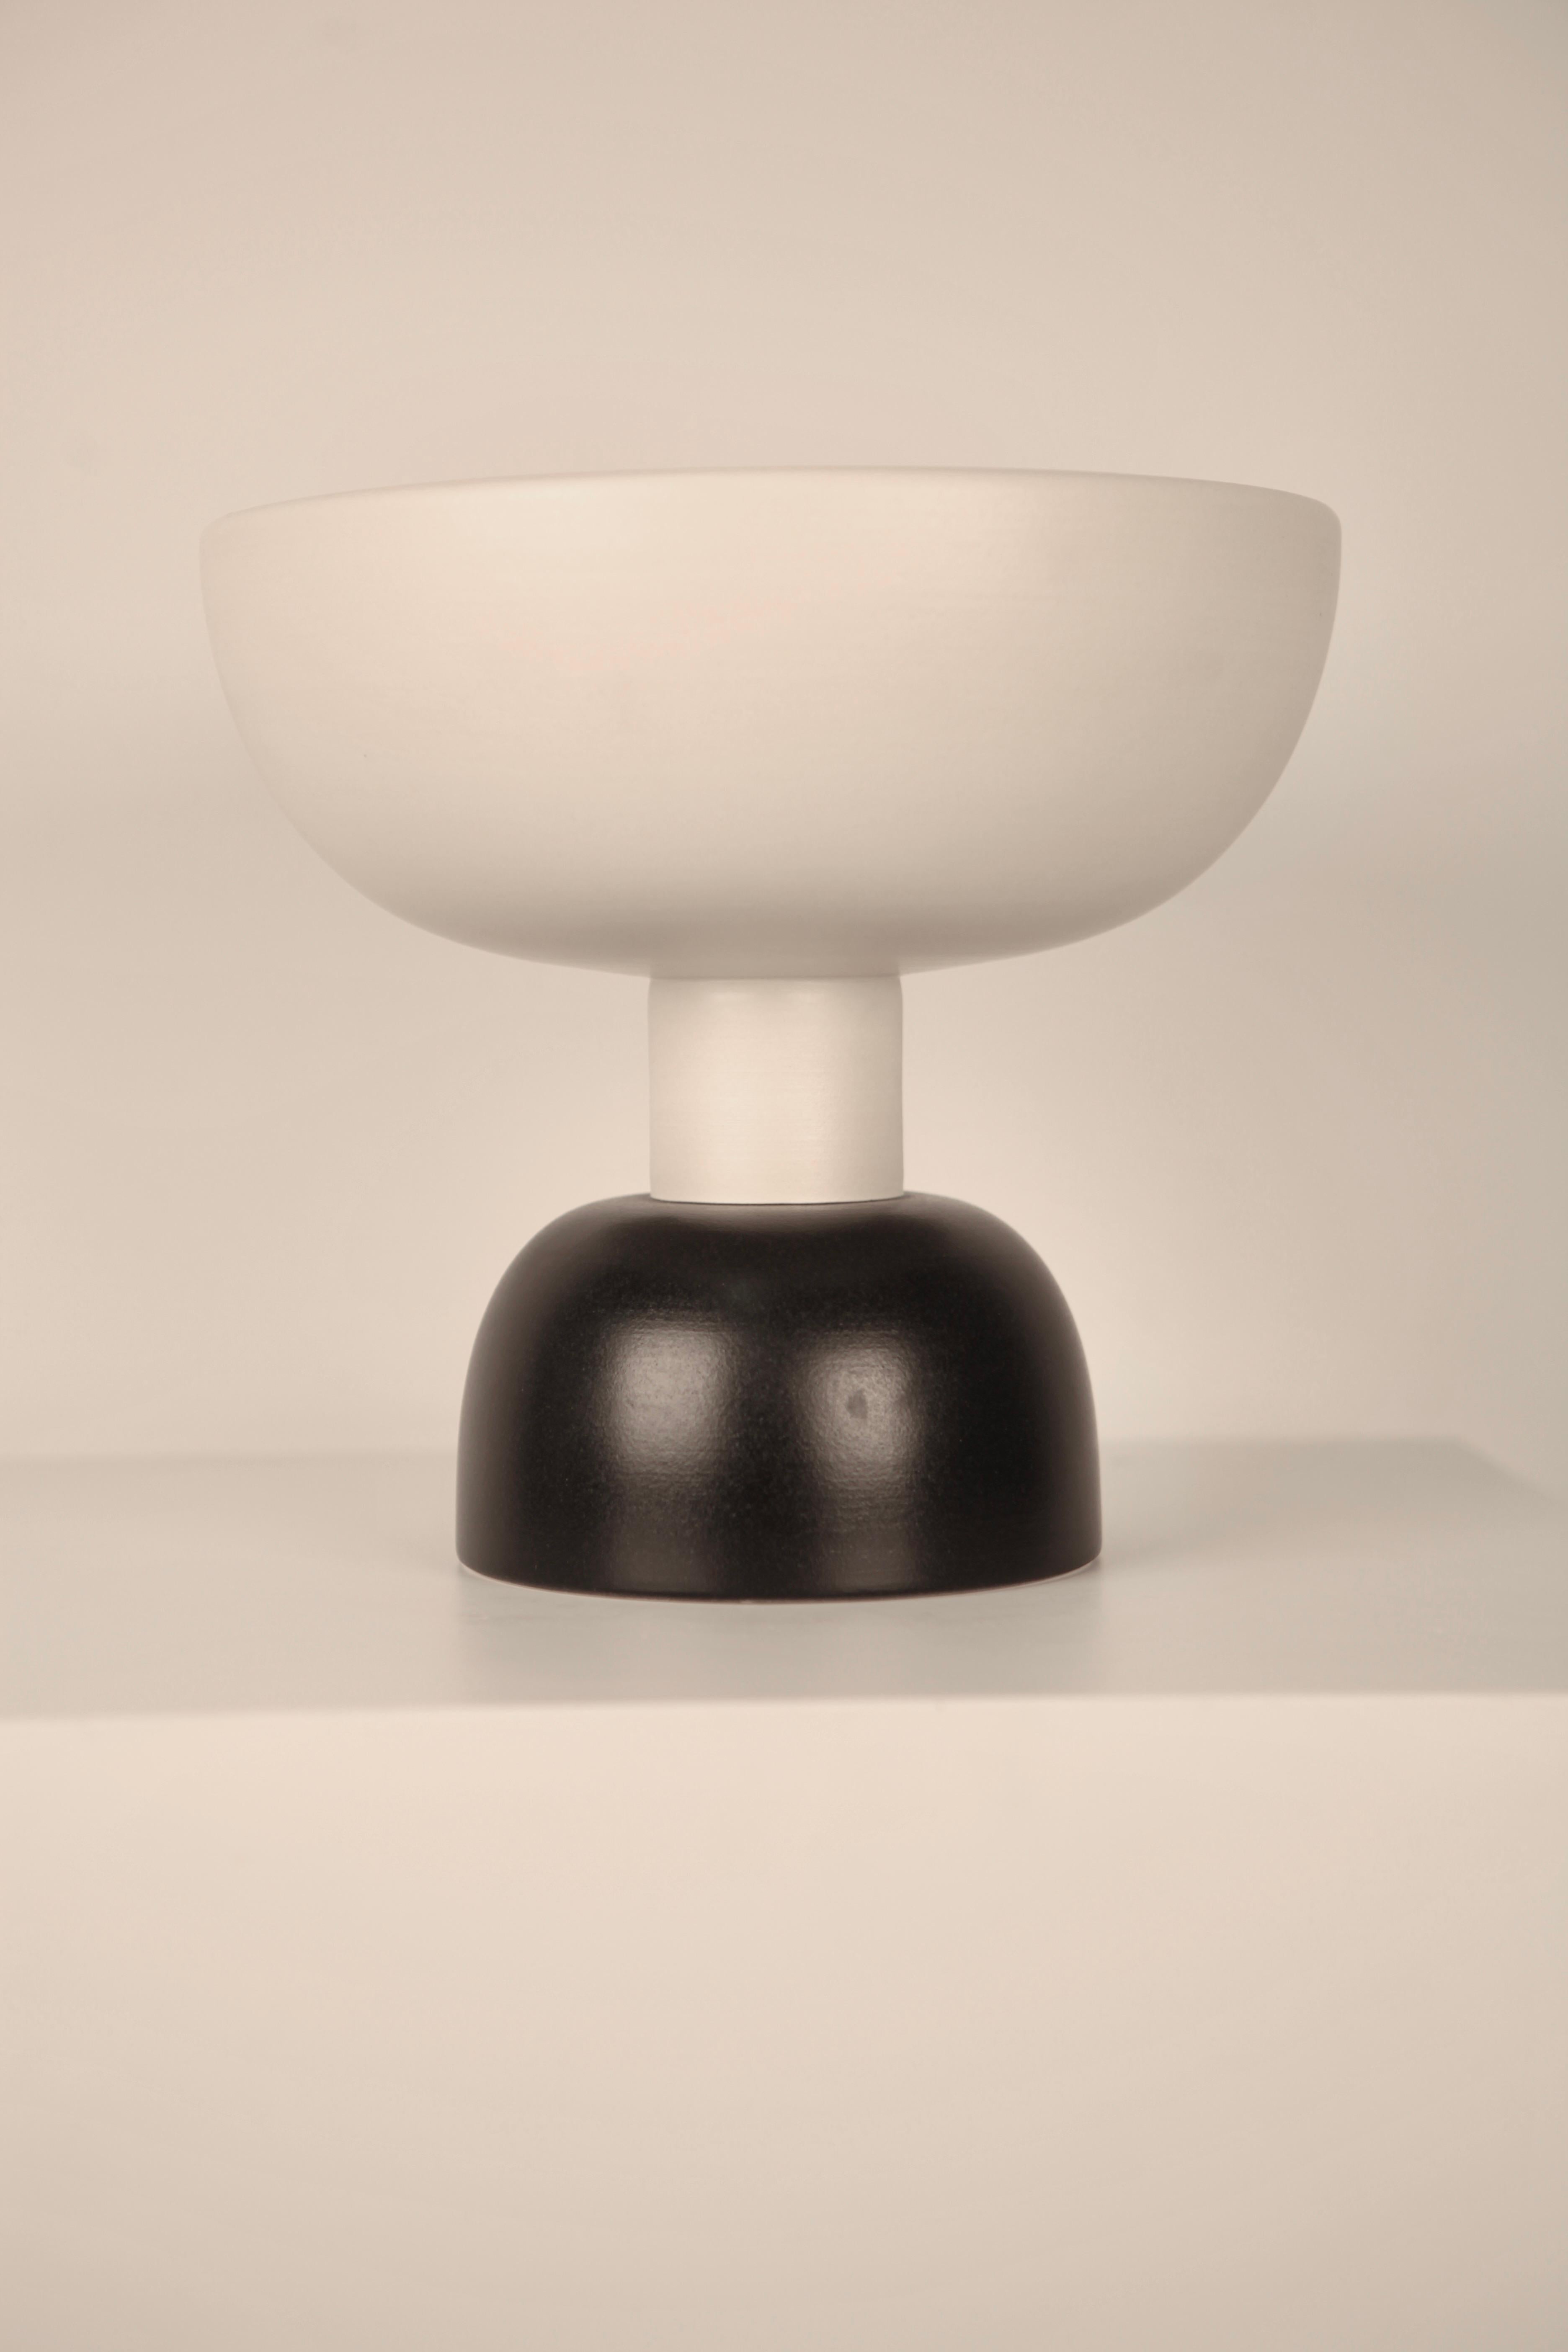 Ettore Sottsass, Glazed Ceramic Bowl, Bitossi, Italy 1968 In Excellent Condition For Sale In Berlin, DE